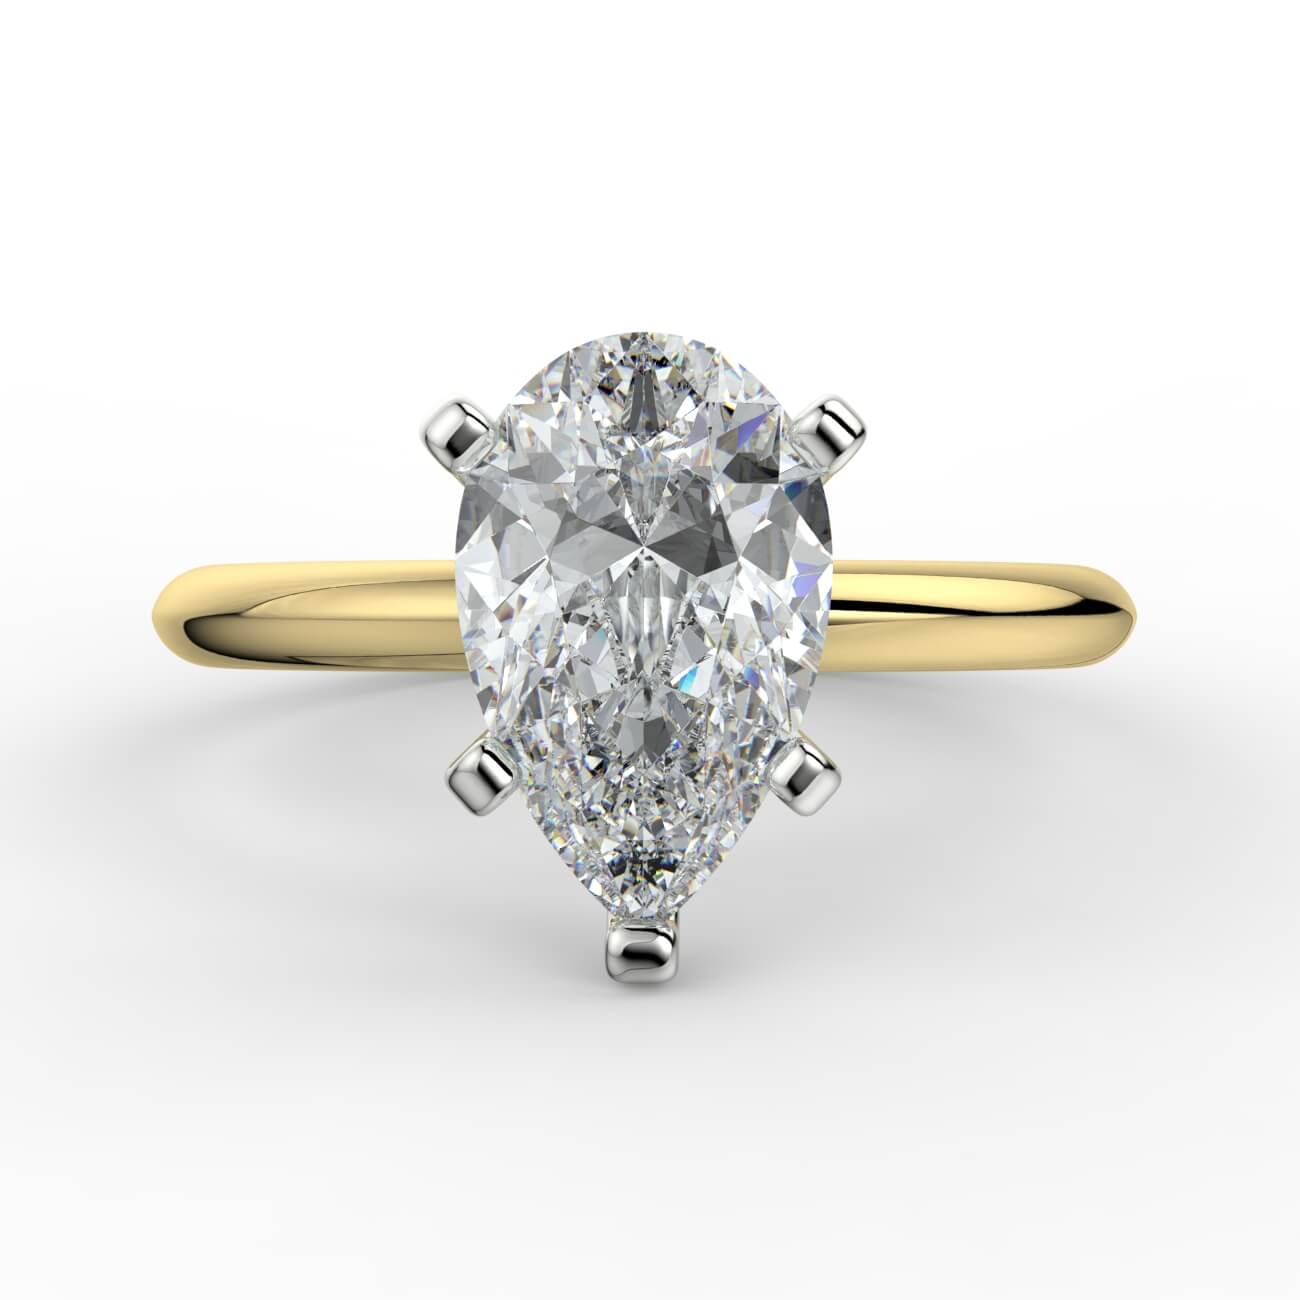 Knife-edge solitaire pear diamond engagement ring in white and yellow gold – Australian Diamond Network